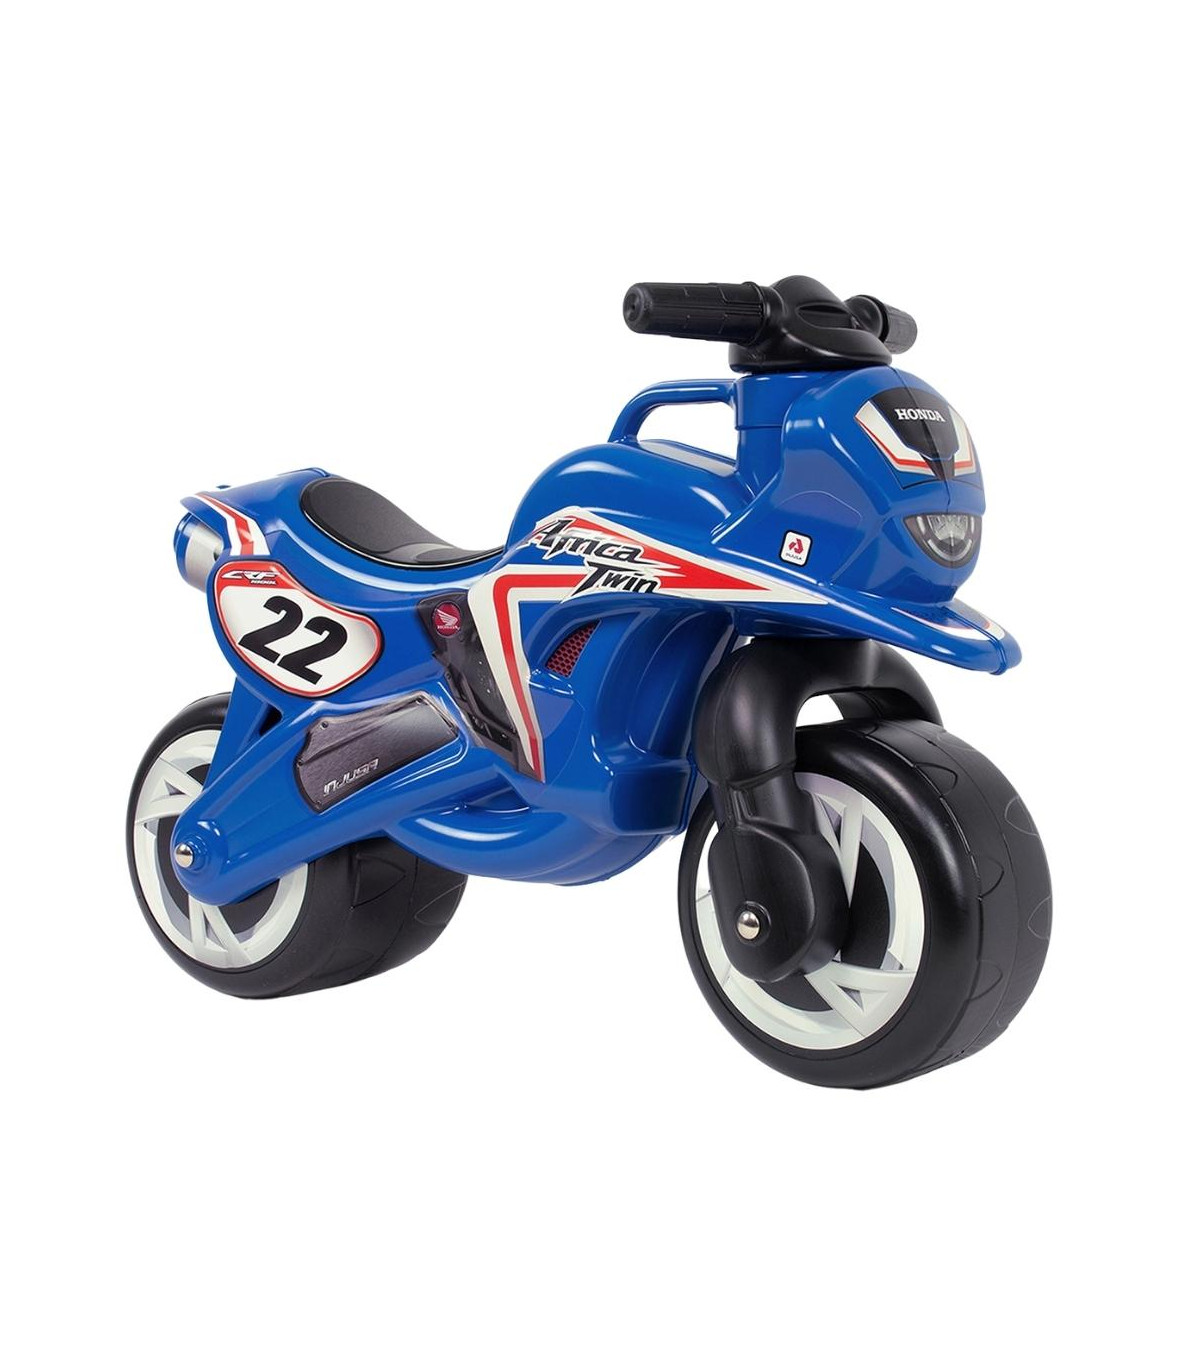 Scooter Injusa ® Honda Africa Twin Blue Ride-On